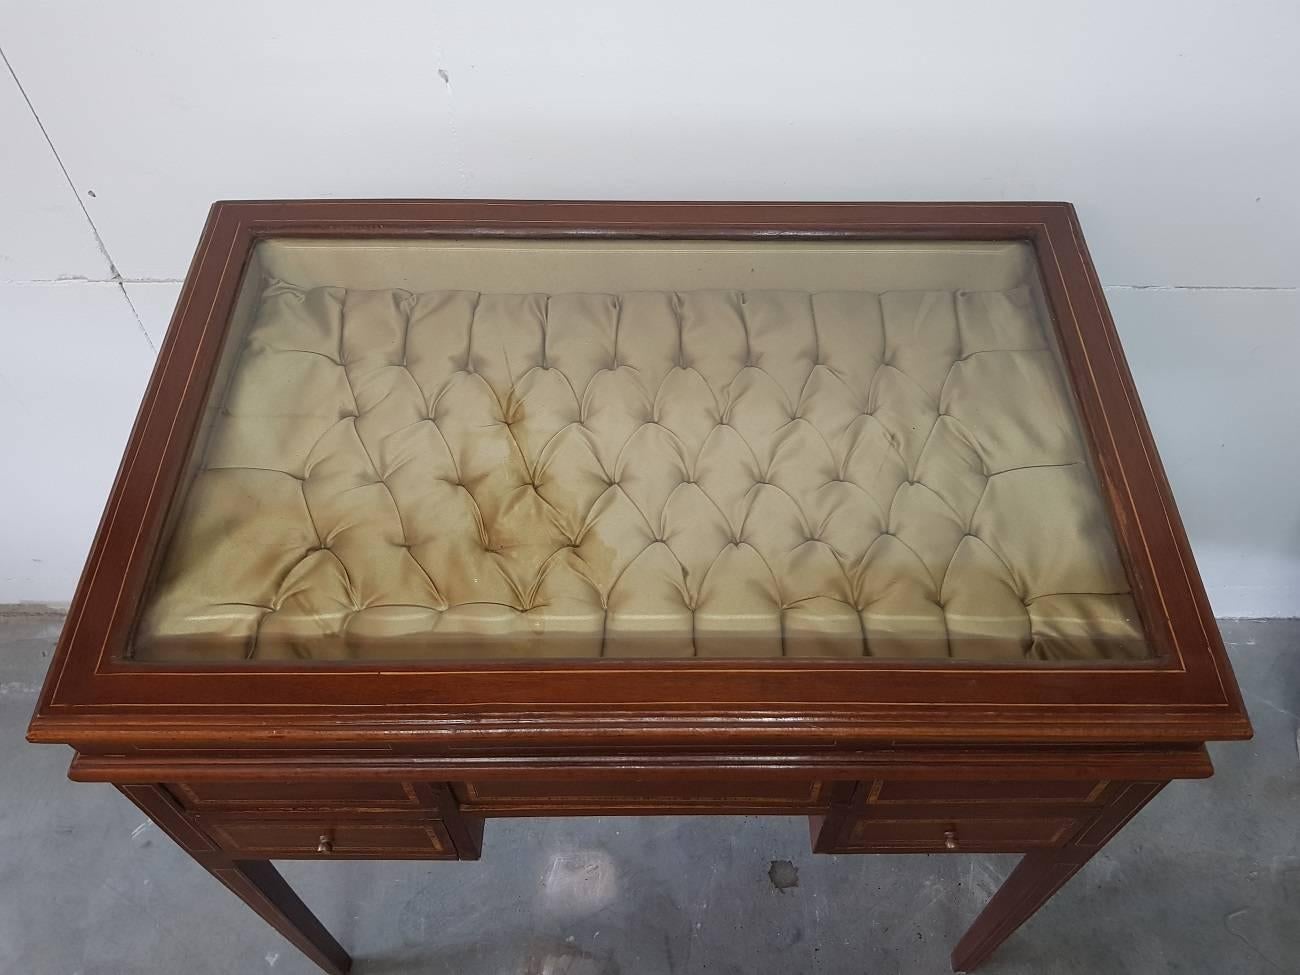 Gorgeous French Bijouterie or display or vitrine table with drawers and all around inlaid with various types of wood. It's made in the style of Charles X and has a faceted glass plate. This furniture is from the 1950s-1960s and in good condition